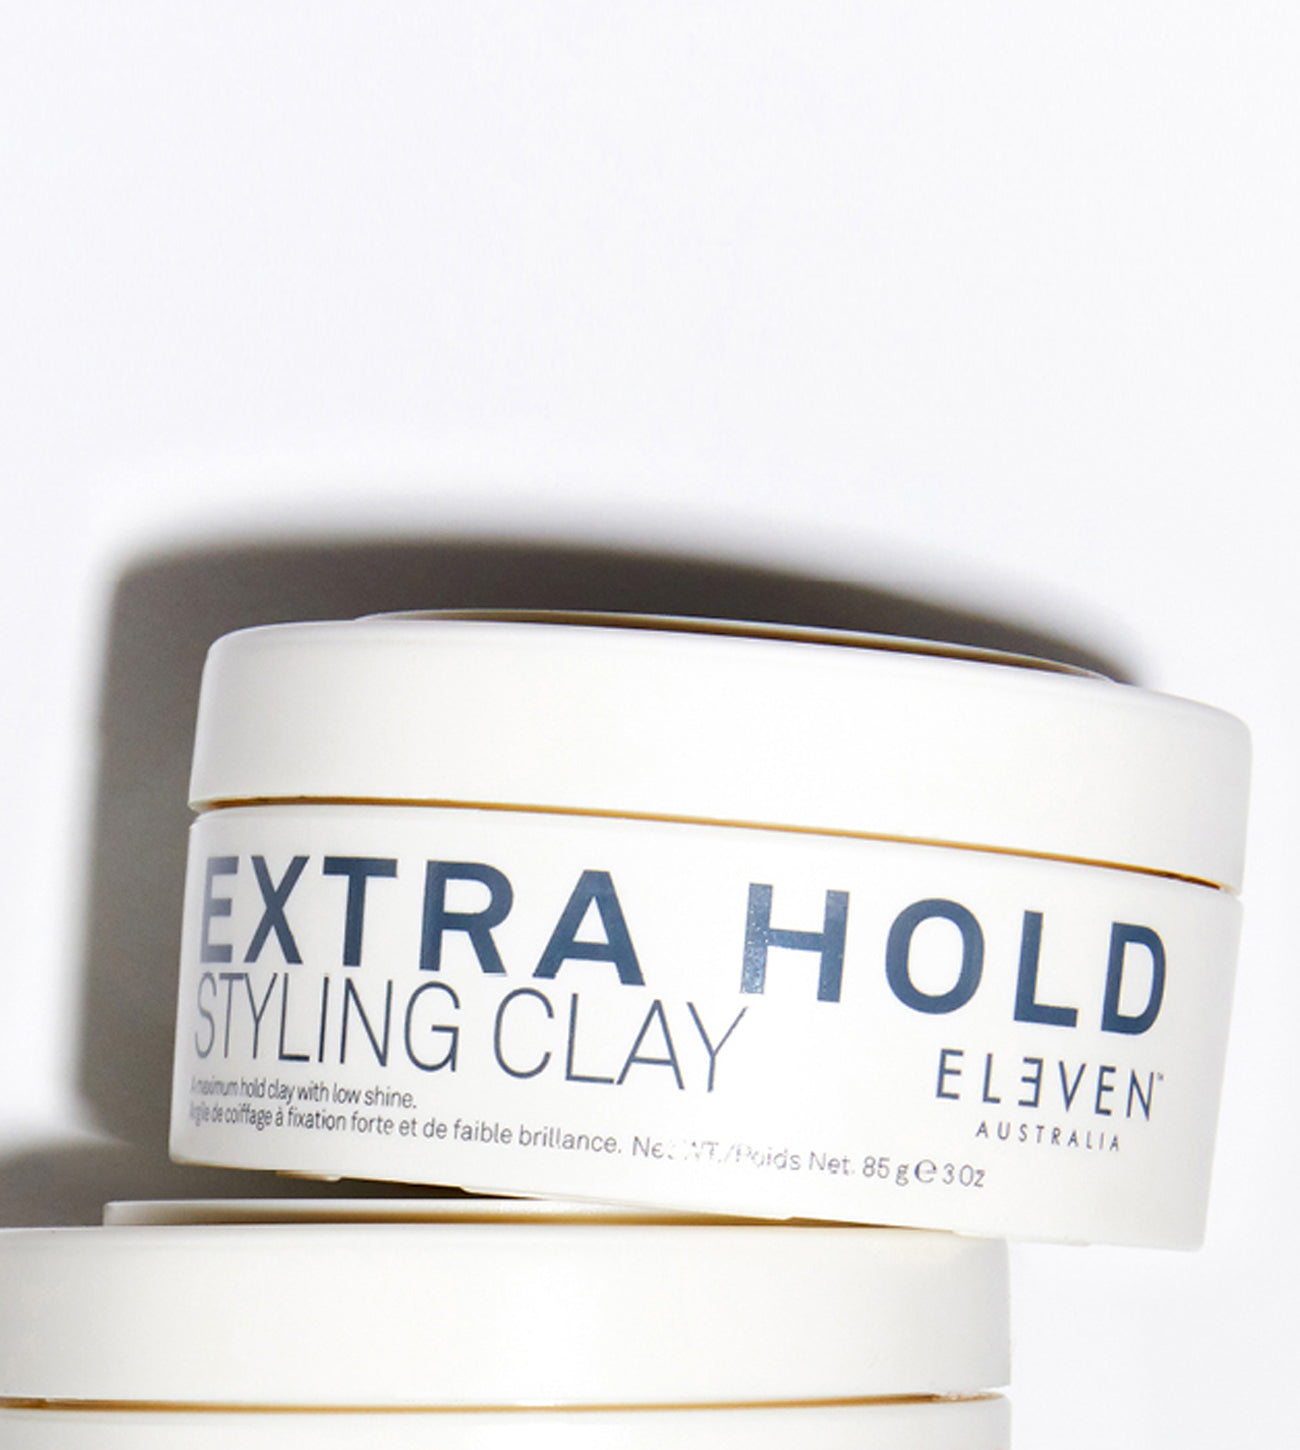 EXTRA HOLD STYLING CLAY 85G